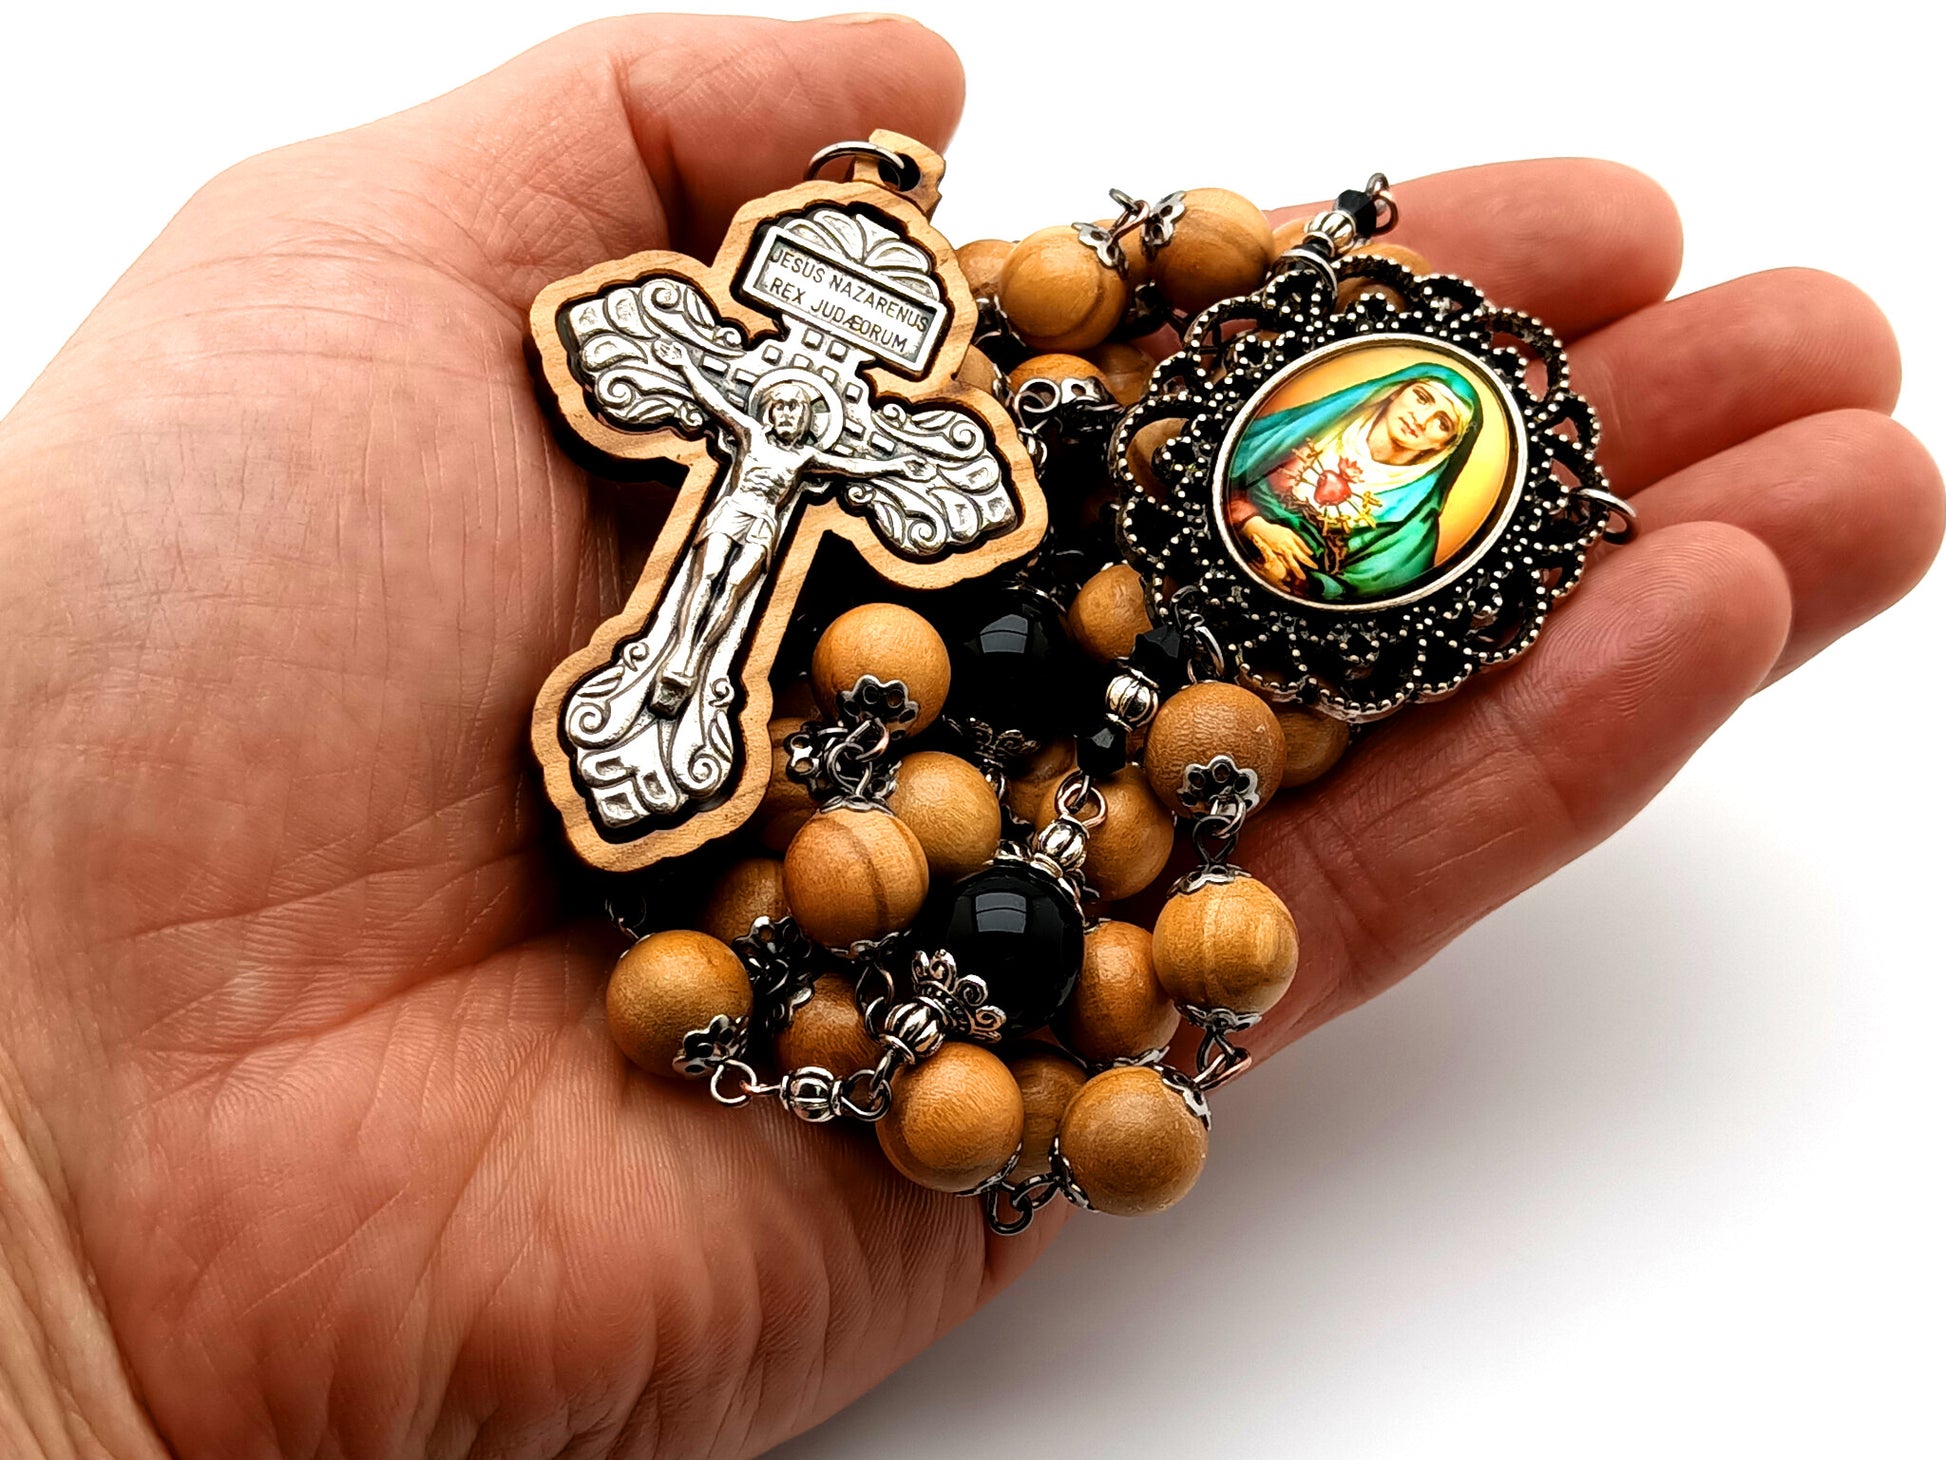 Our Lady of Sorrows unique rosary beads with olive wood and onyx gemstone beads and olive wood framed pardon crucifix.